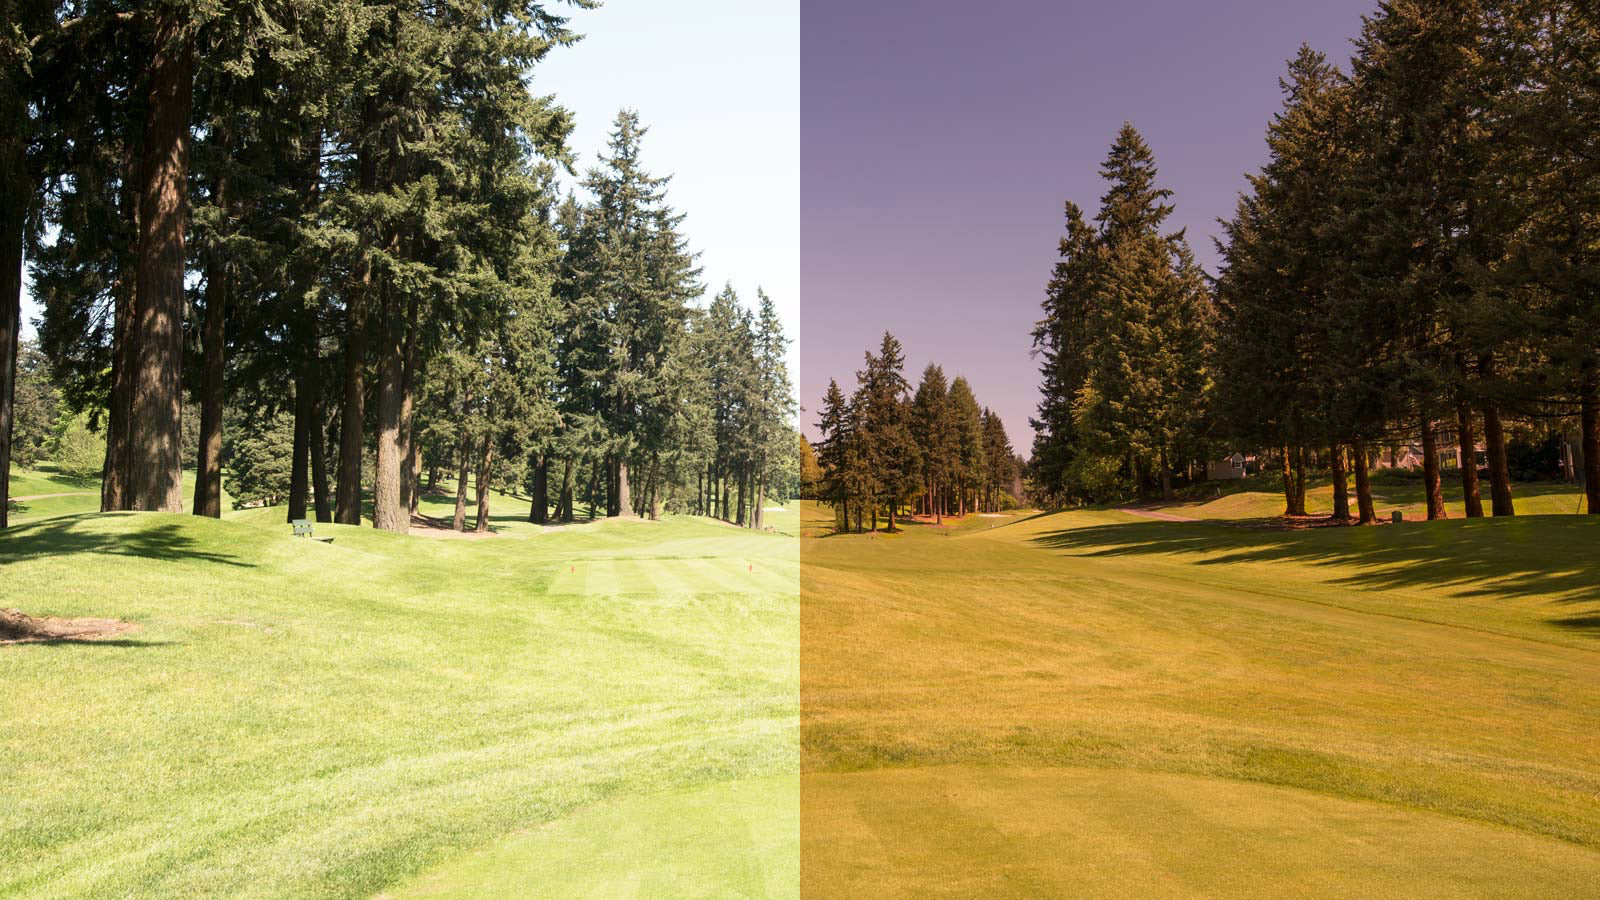 Golf course view seen with and without the Emerald Green lens